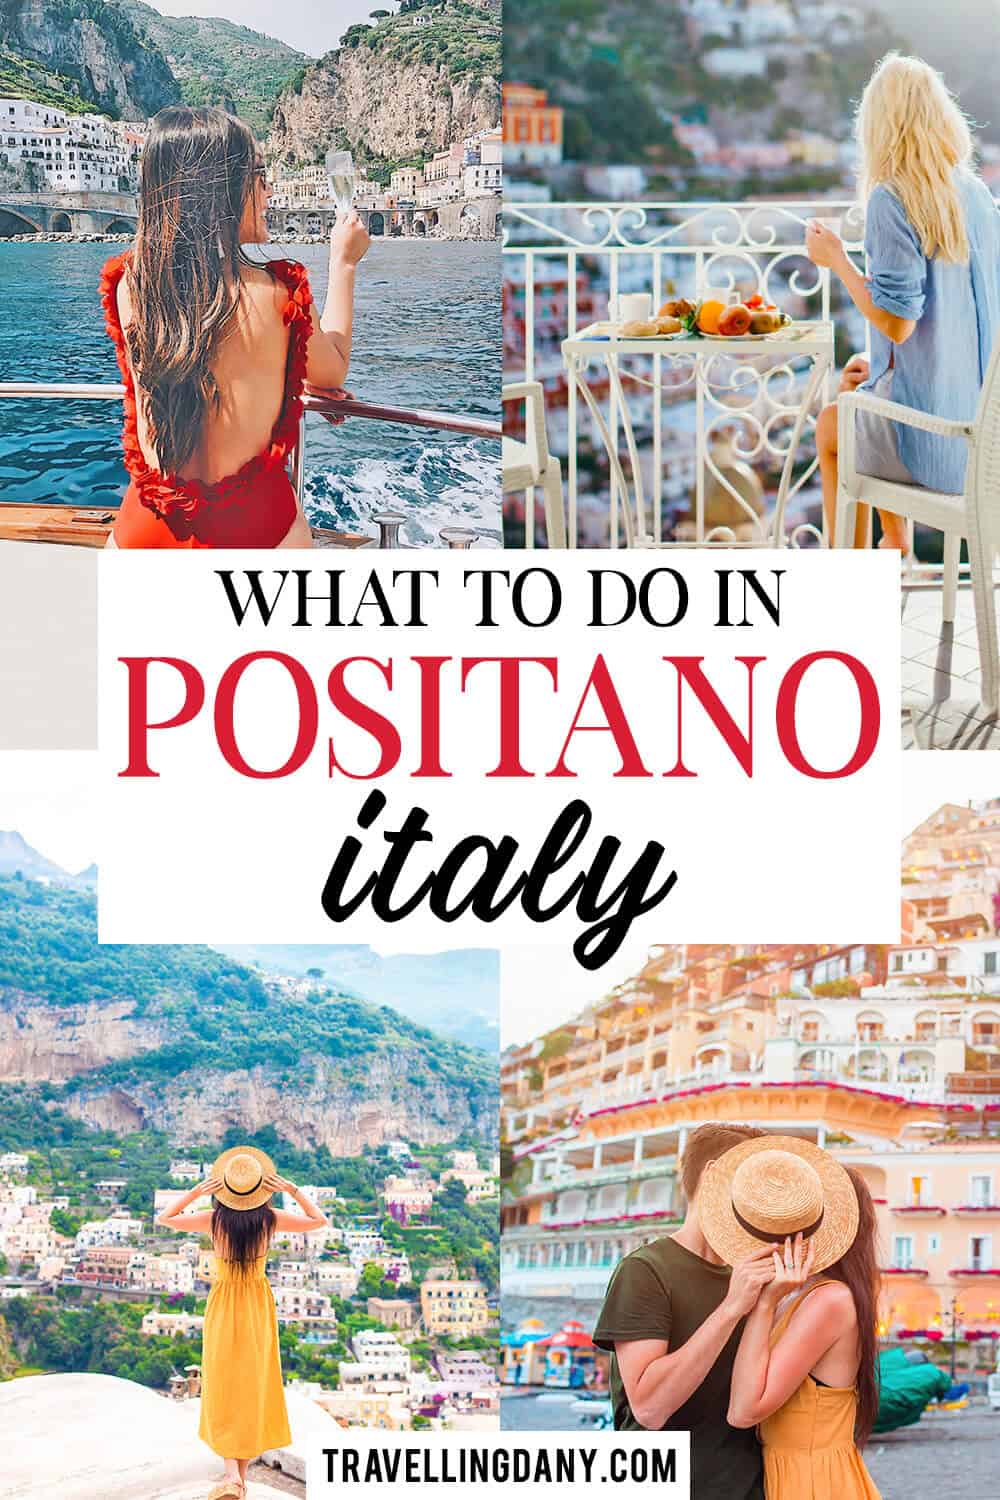 Discover the best things to do in Positano with our ultimate guide. From stunning beaches to scenic hiking trails, our comprehensive list of top activities and attractions has got you covered. Maximize your time in this beautiful coastal gem with our expert tips and recommendations. Start planning your unforgettable Positano adventure today!